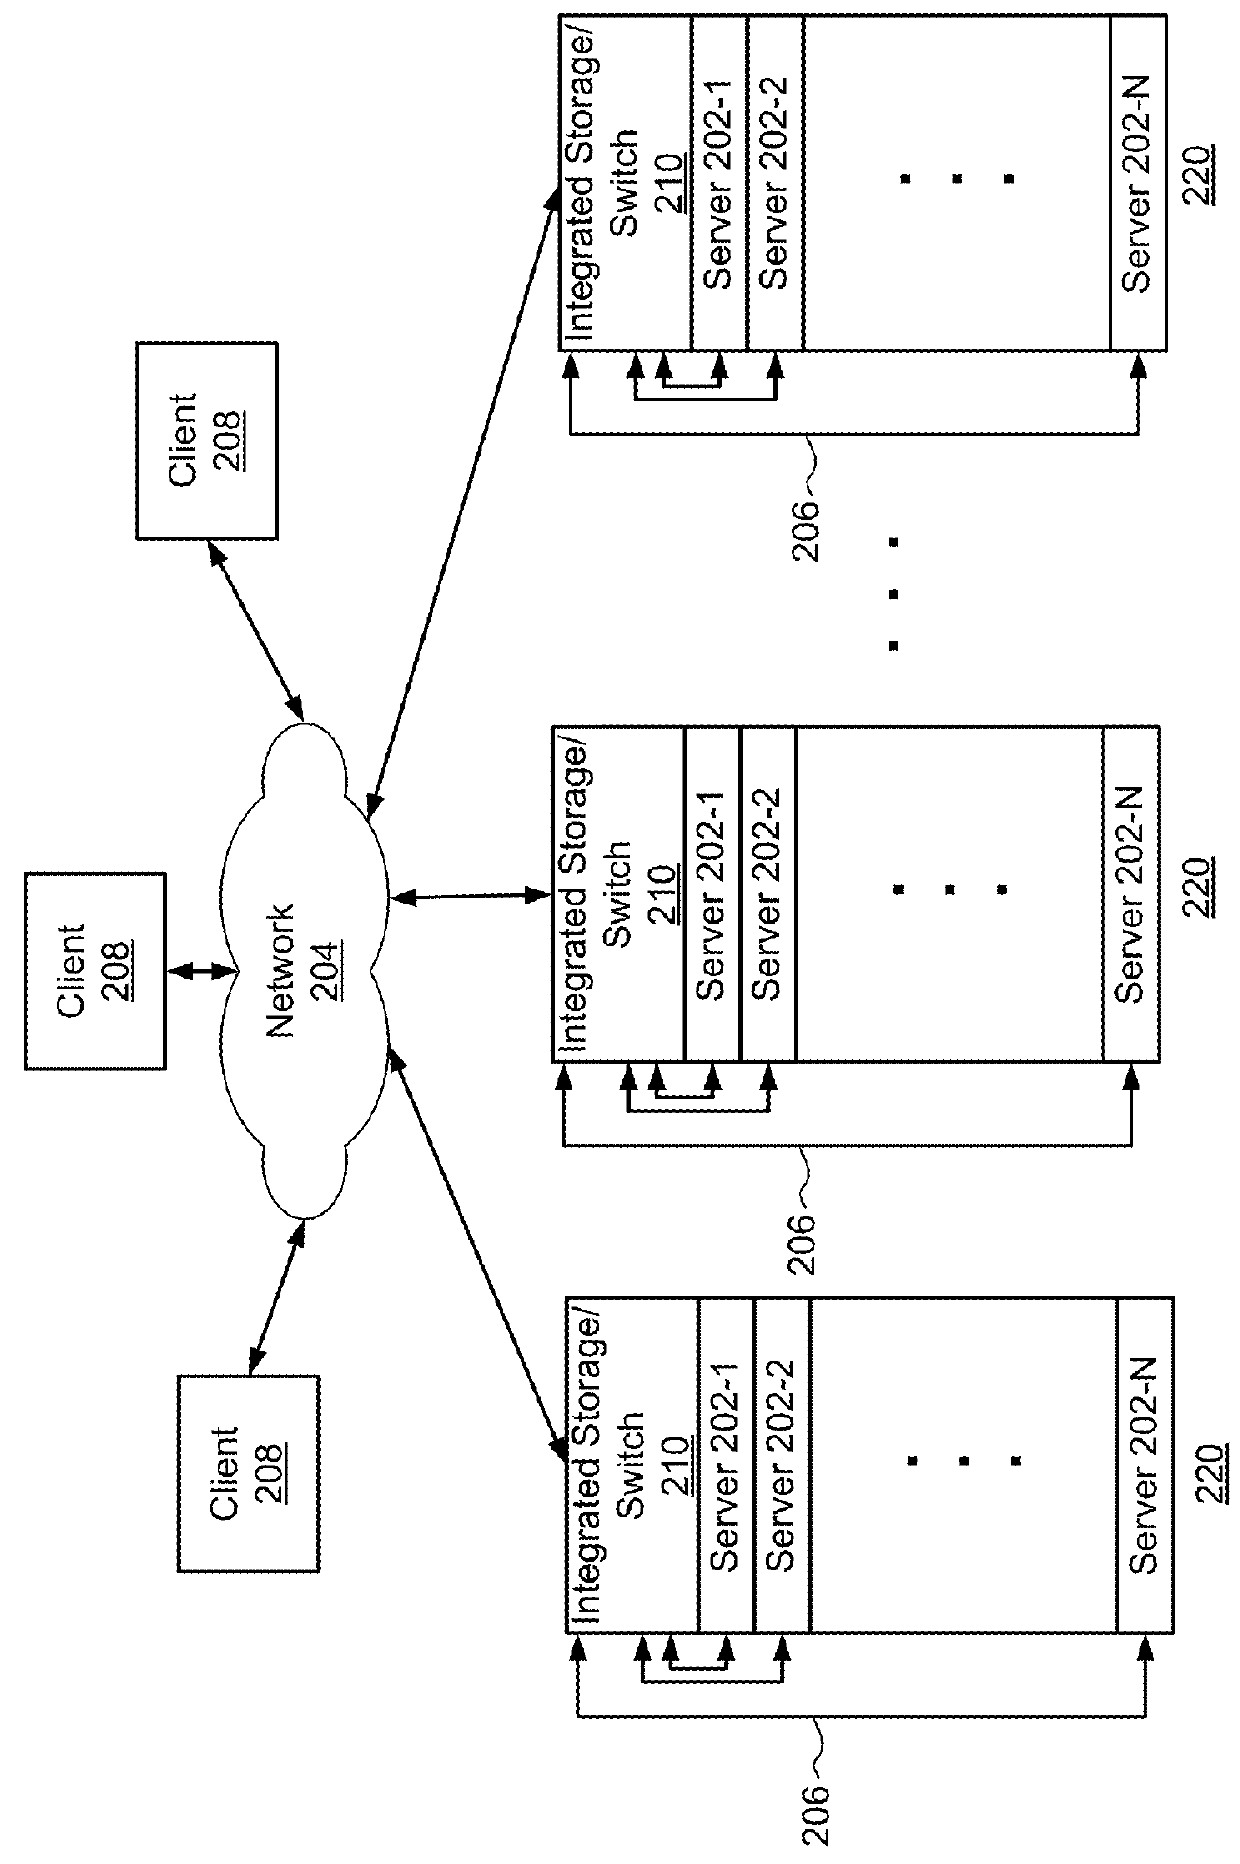 Integrated storage and switching for memory systems